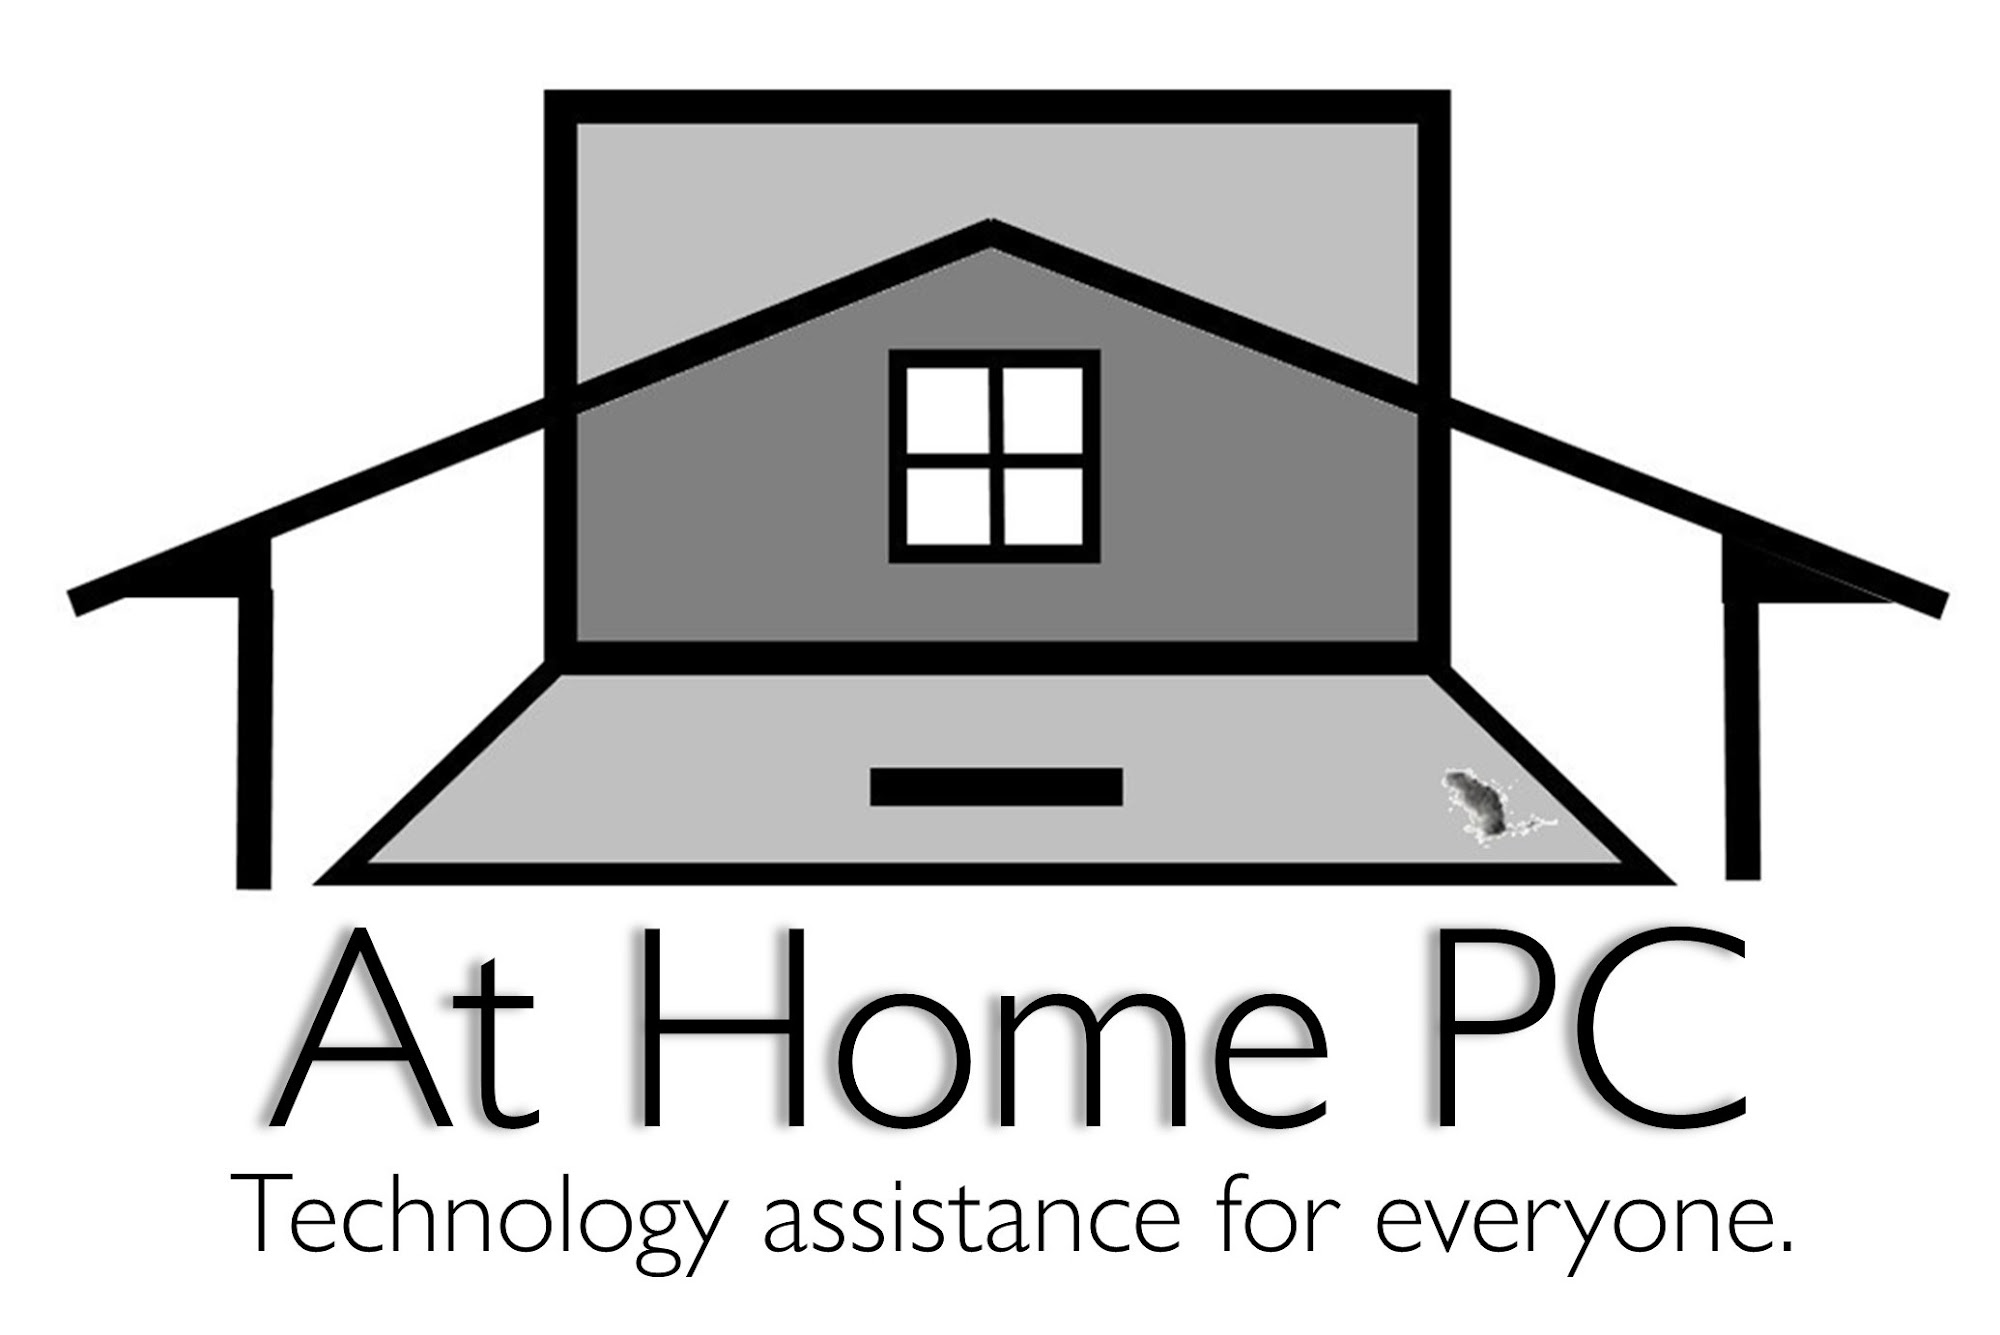 At Home PC Computer, tablet and home technology assistance!